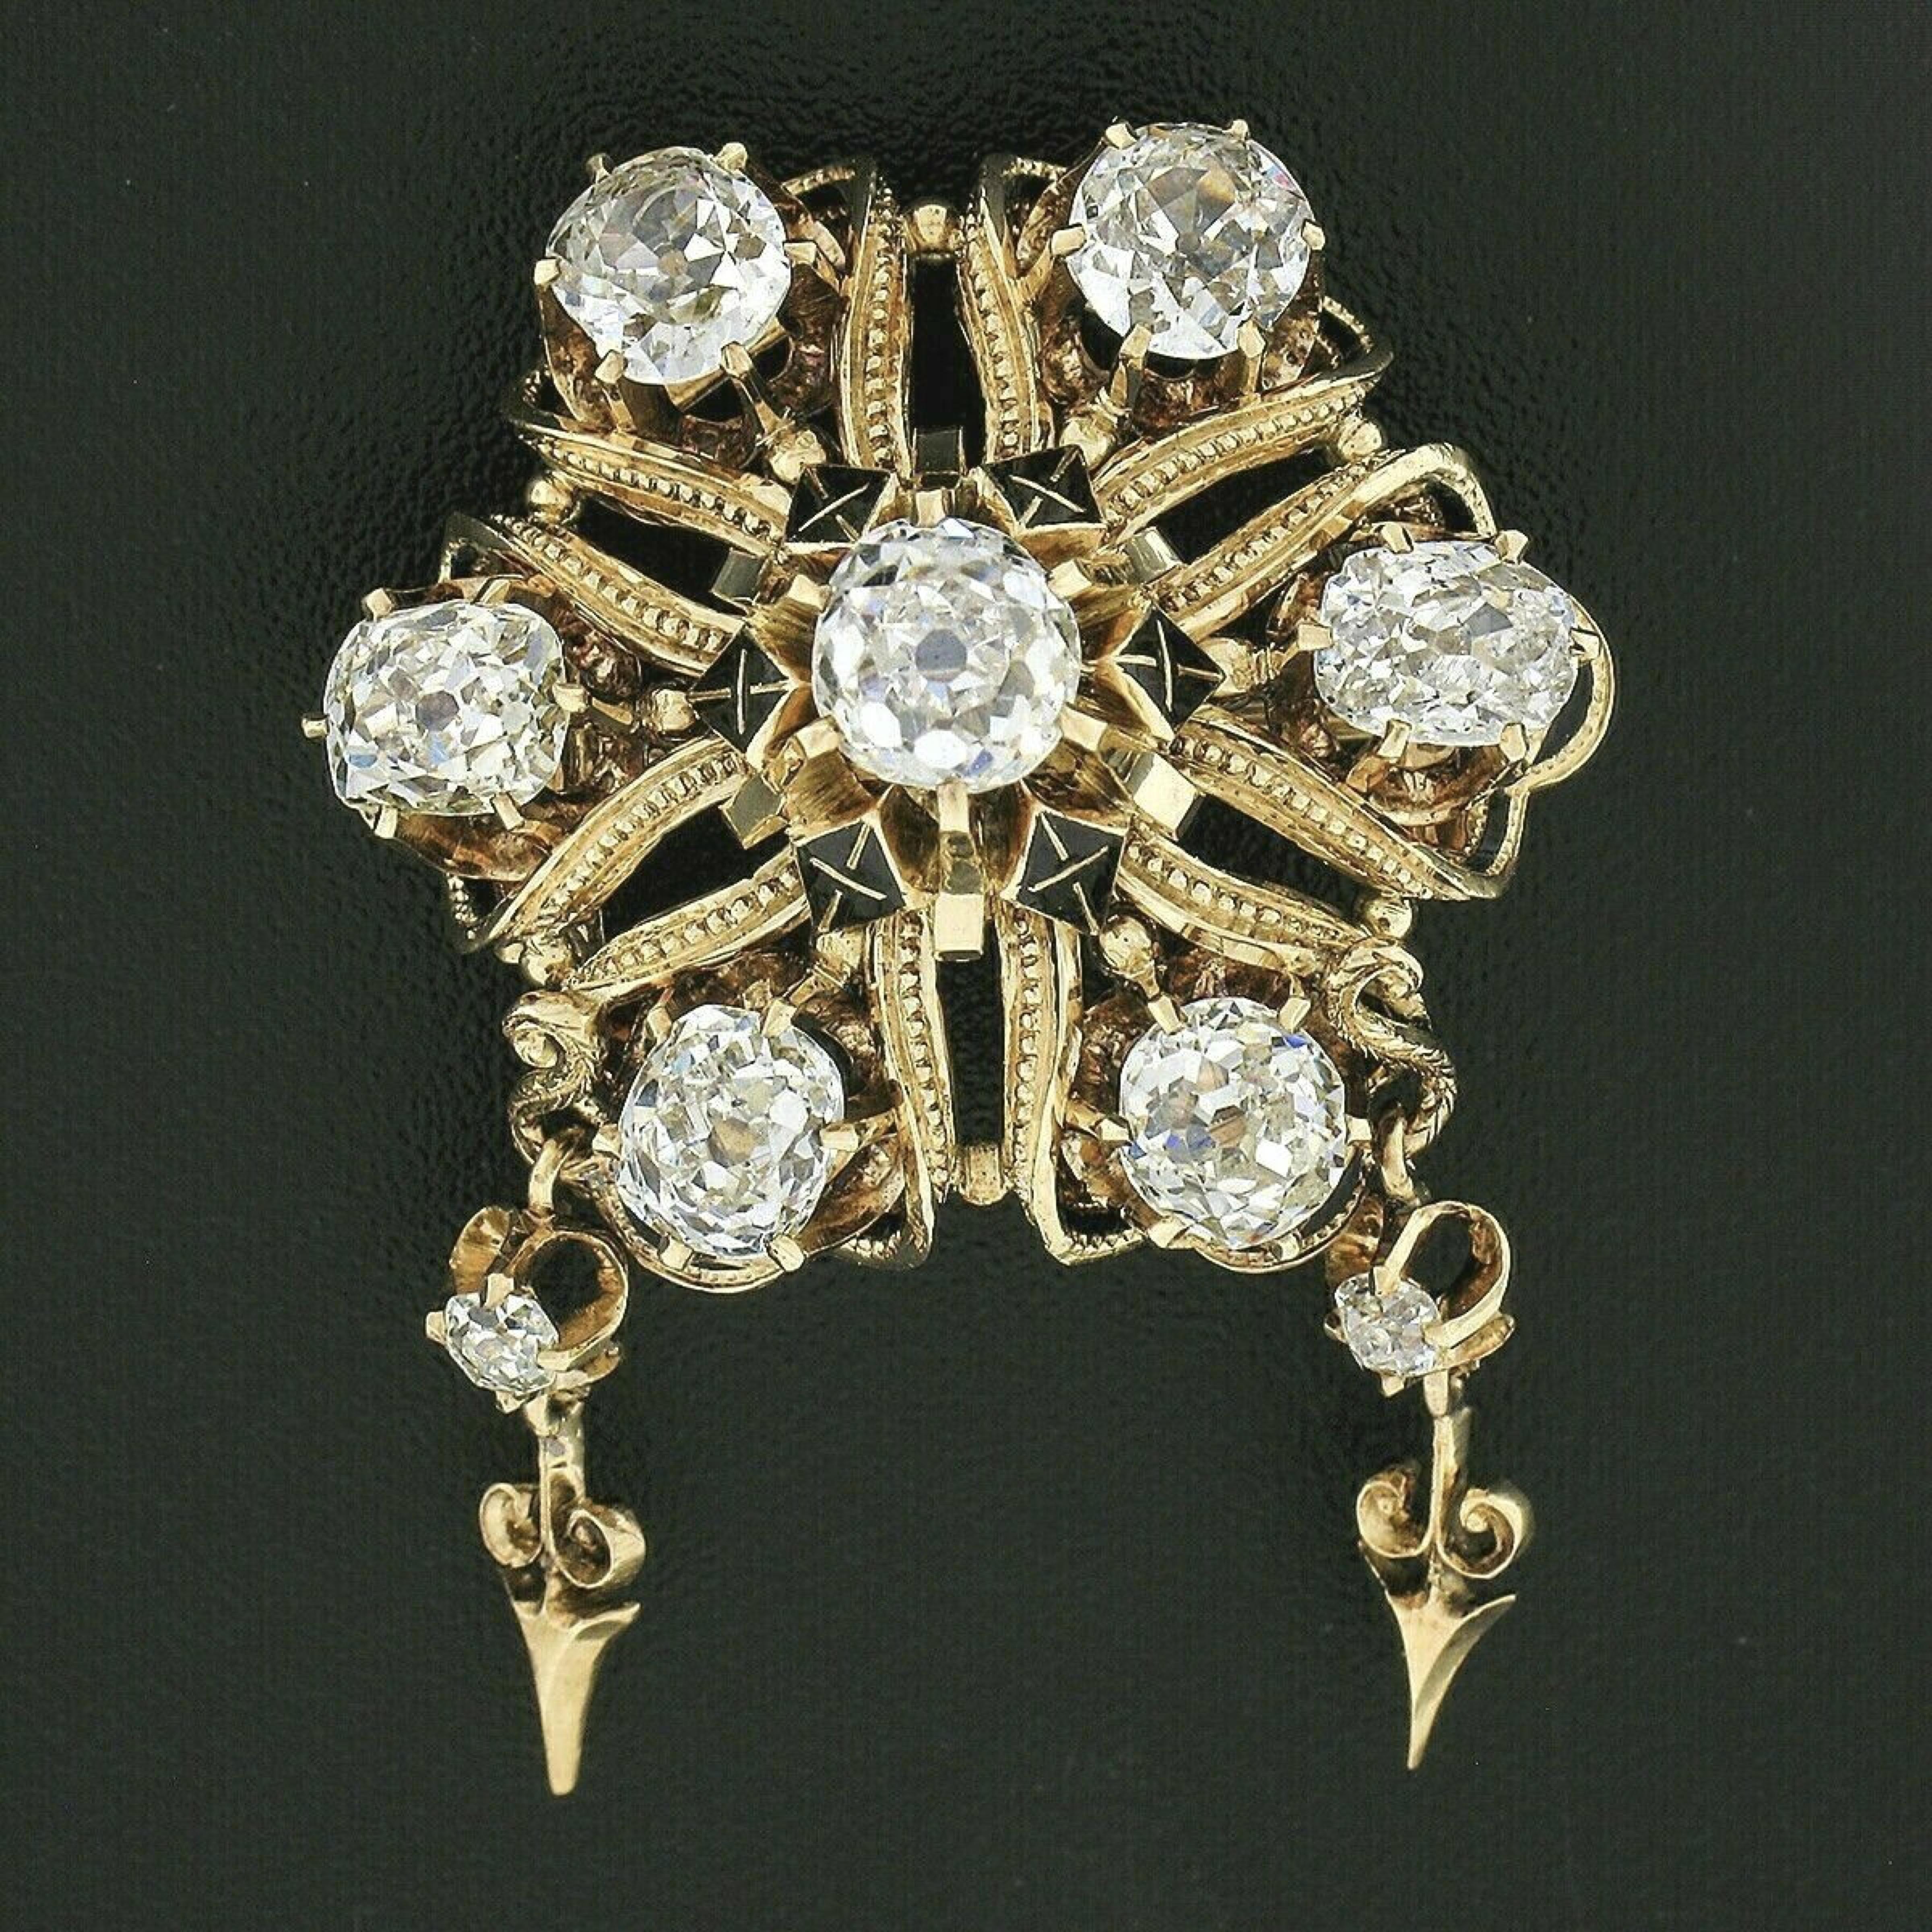 This is an absolutely breathtaking antique brooch that was crafted in solid 18k yellow gold during the Victorian era and features a gorgeous open work flower design that is set with fine quality diamonds throughout. The seven stunning diamonds at